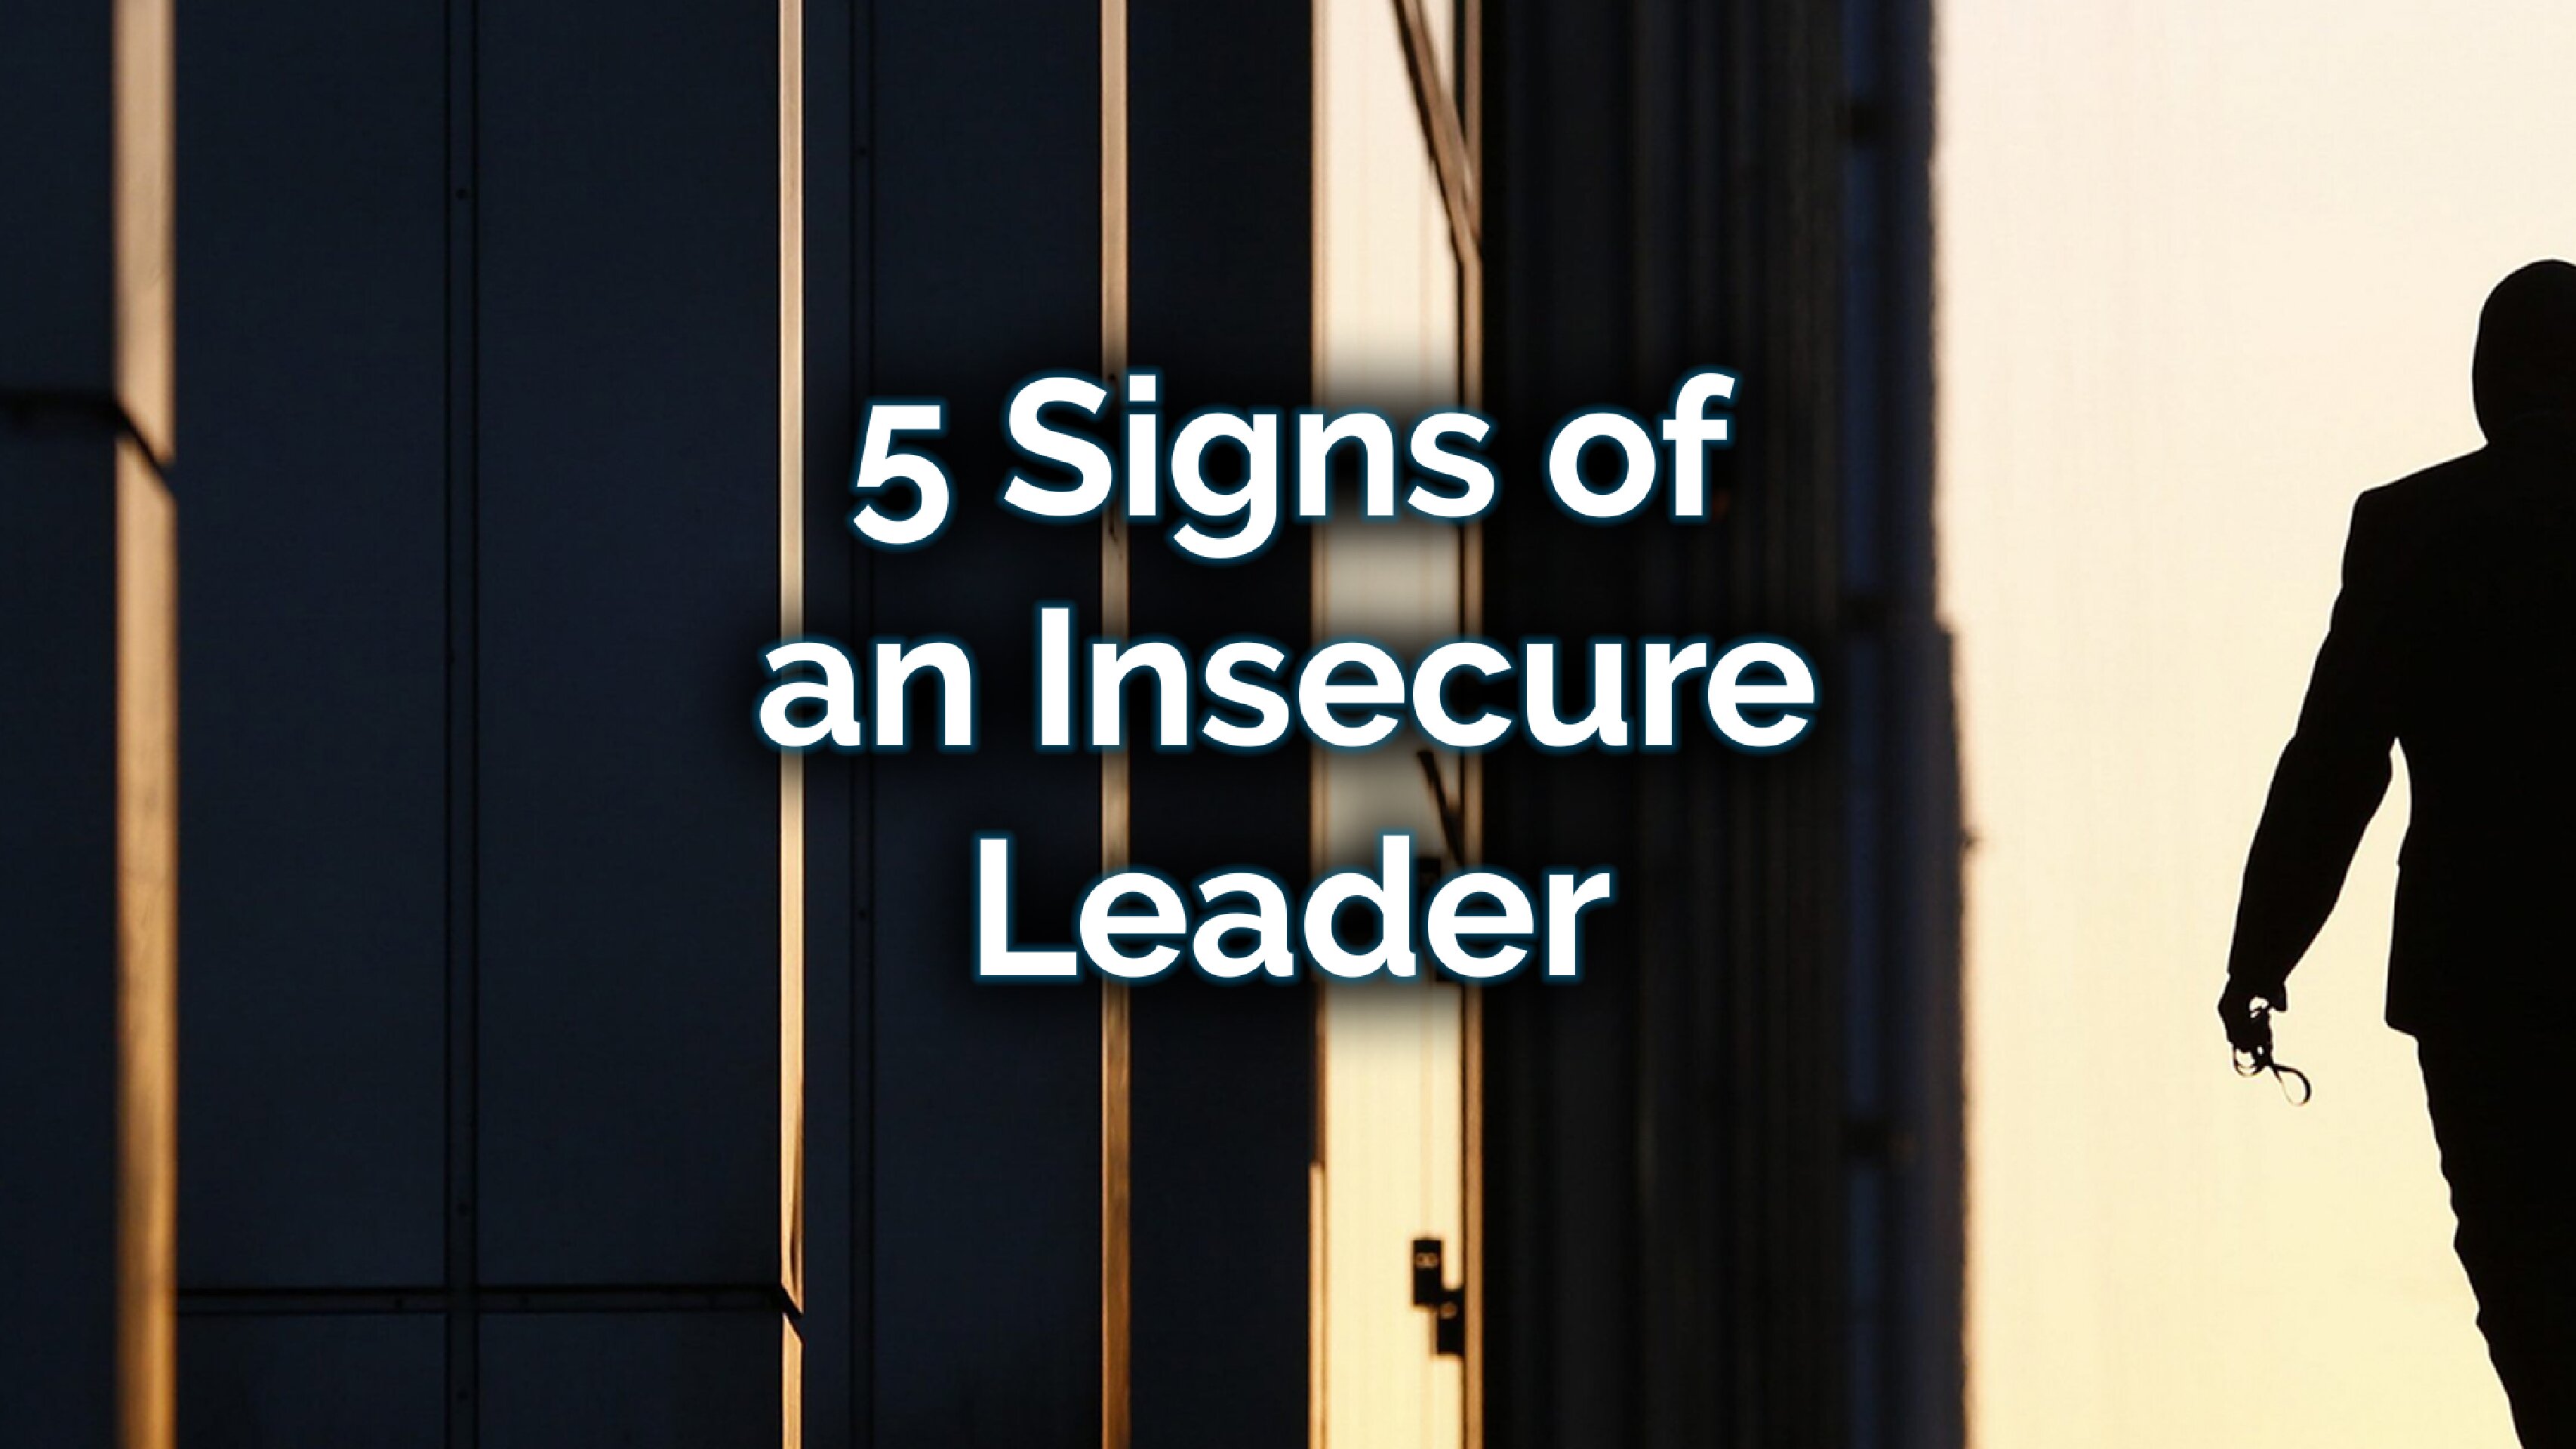 5 Signs of an Insecure Leader